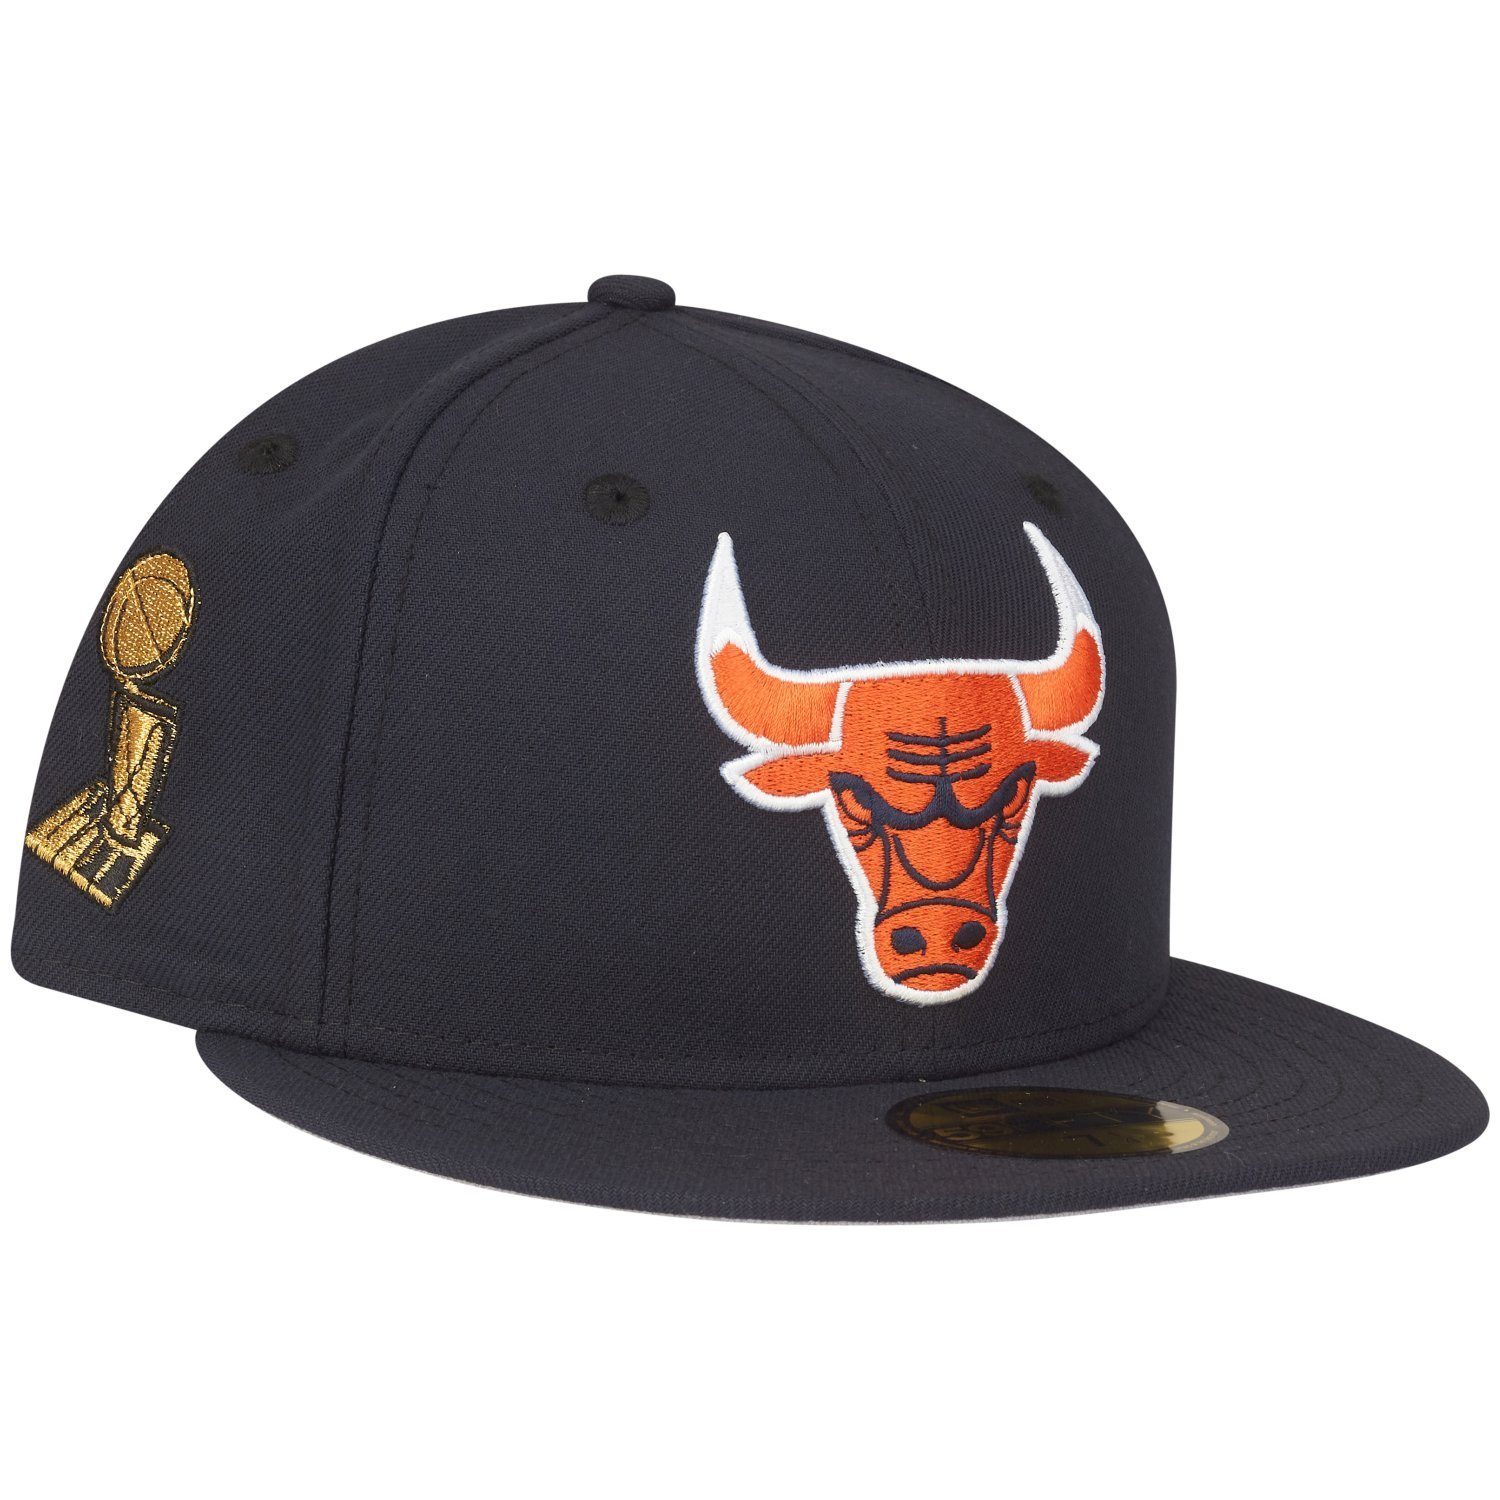 New Fitted Bulls Cap 59Fifty Era Chicago CHAMPS